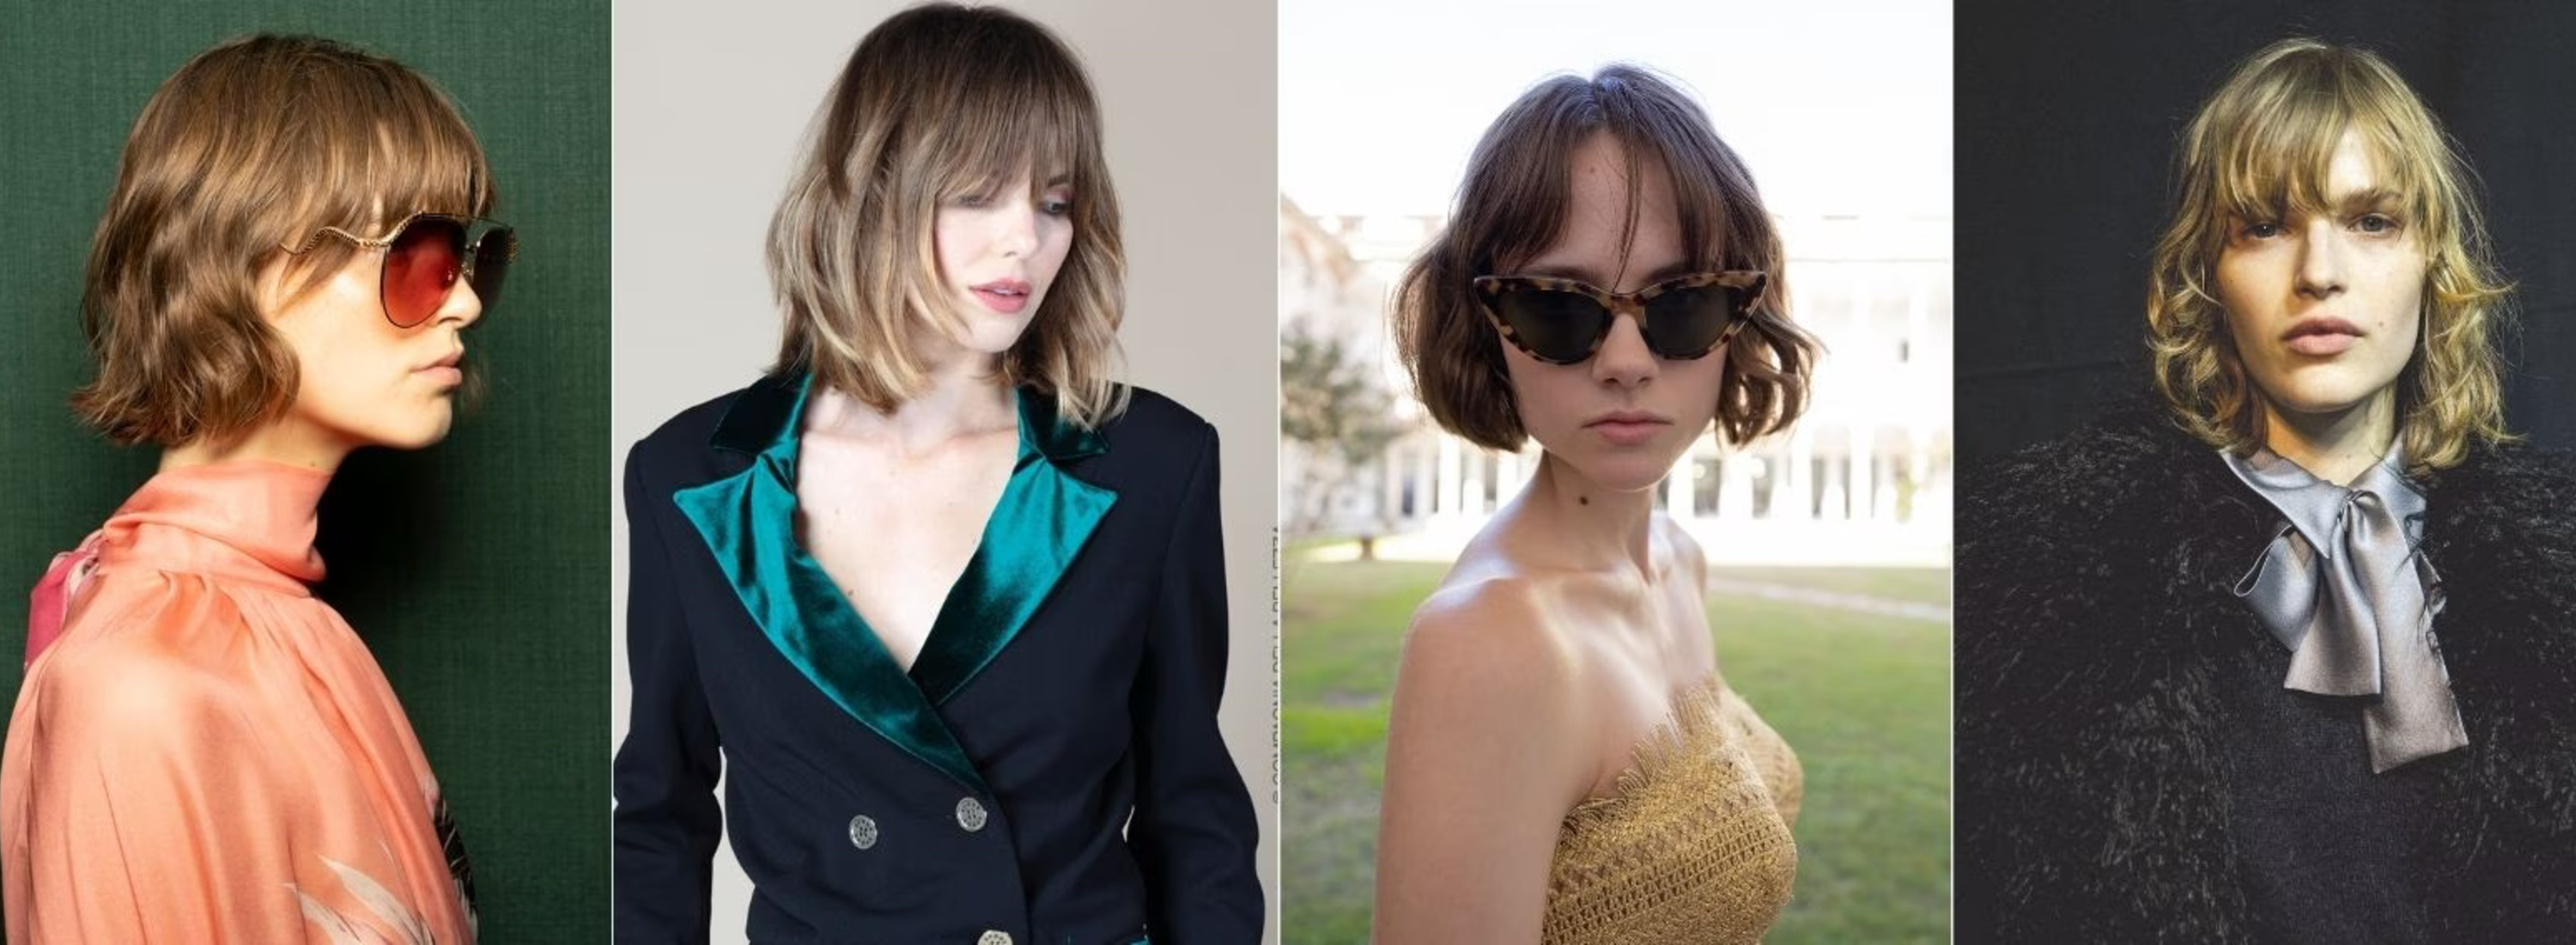 Hair trend alert for 2022: The side-part bob haircut | Vogue India